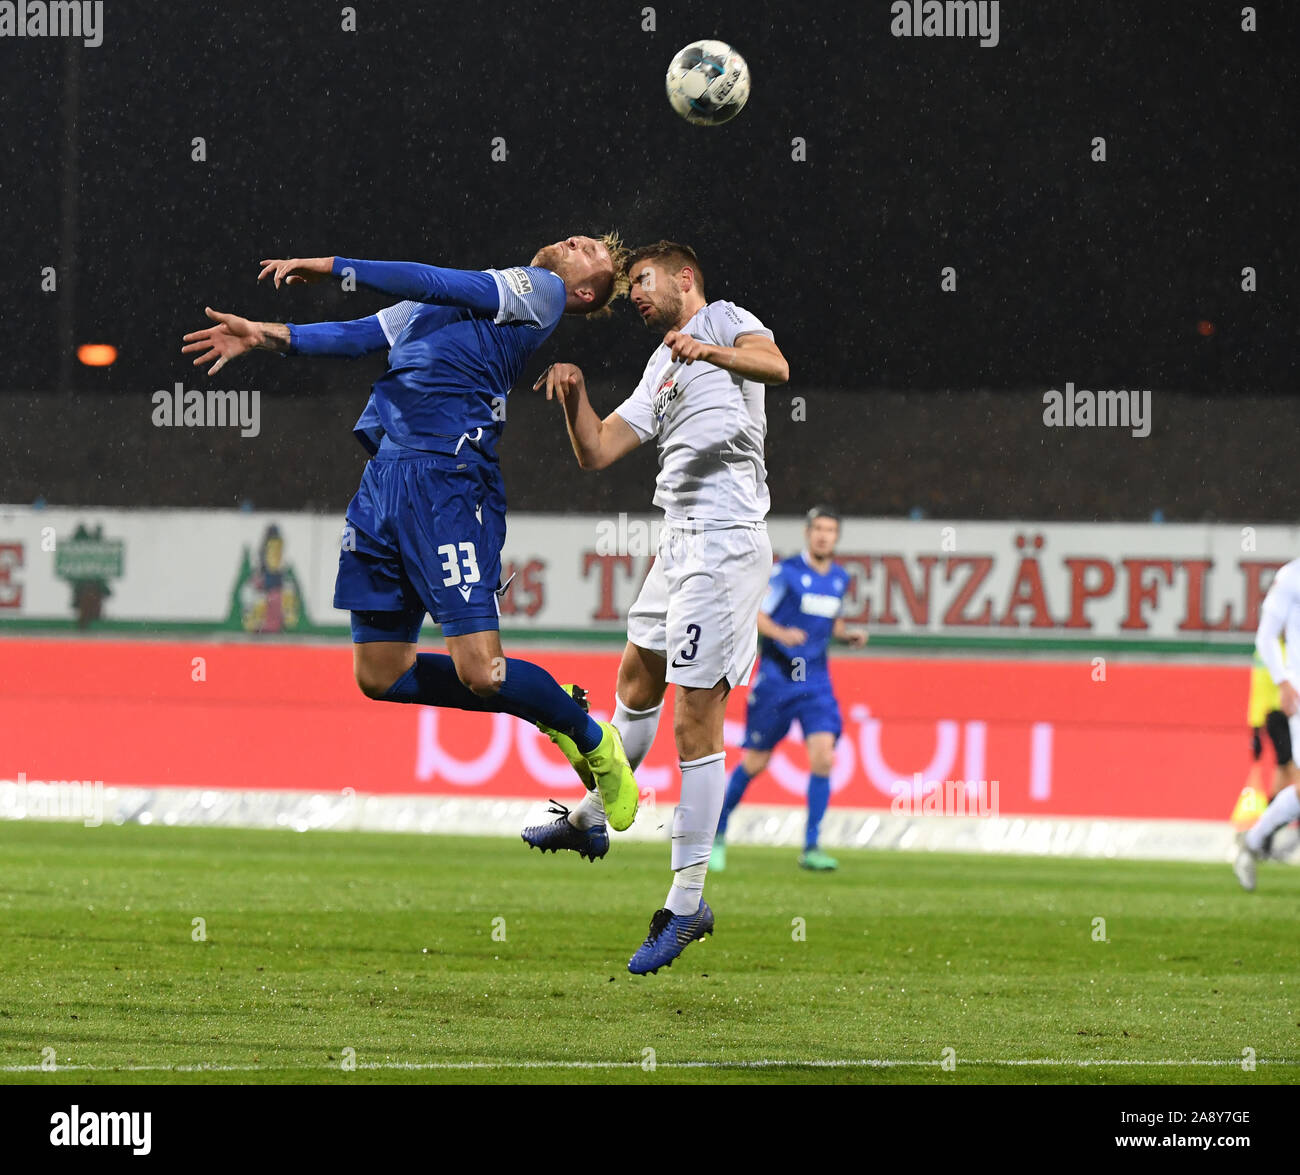 Karlsruhe, Germany. 11th Nov, 2019. Soccer: 2nd Bundesliga, Karlsruher SC - Erzgebirge Aue, 13th matchday in the Wildparkstadion. Philipp Hofmann (l) from Karlsruhe and Marko Mihojevic from Auer fight for the ball. Credit: Uli Deck/dpa - IMPORTANT NOTE: In accordance with the requirements of the DFL Deutsche Fußball Liga or the DFB Deutscher Fußball-Bund, it is prohibited to use or have used photographs taken in the stadium and/or the match in the form of sequence images and/or video-like photo sequences./dpa/Alamy Live News Stock Photo